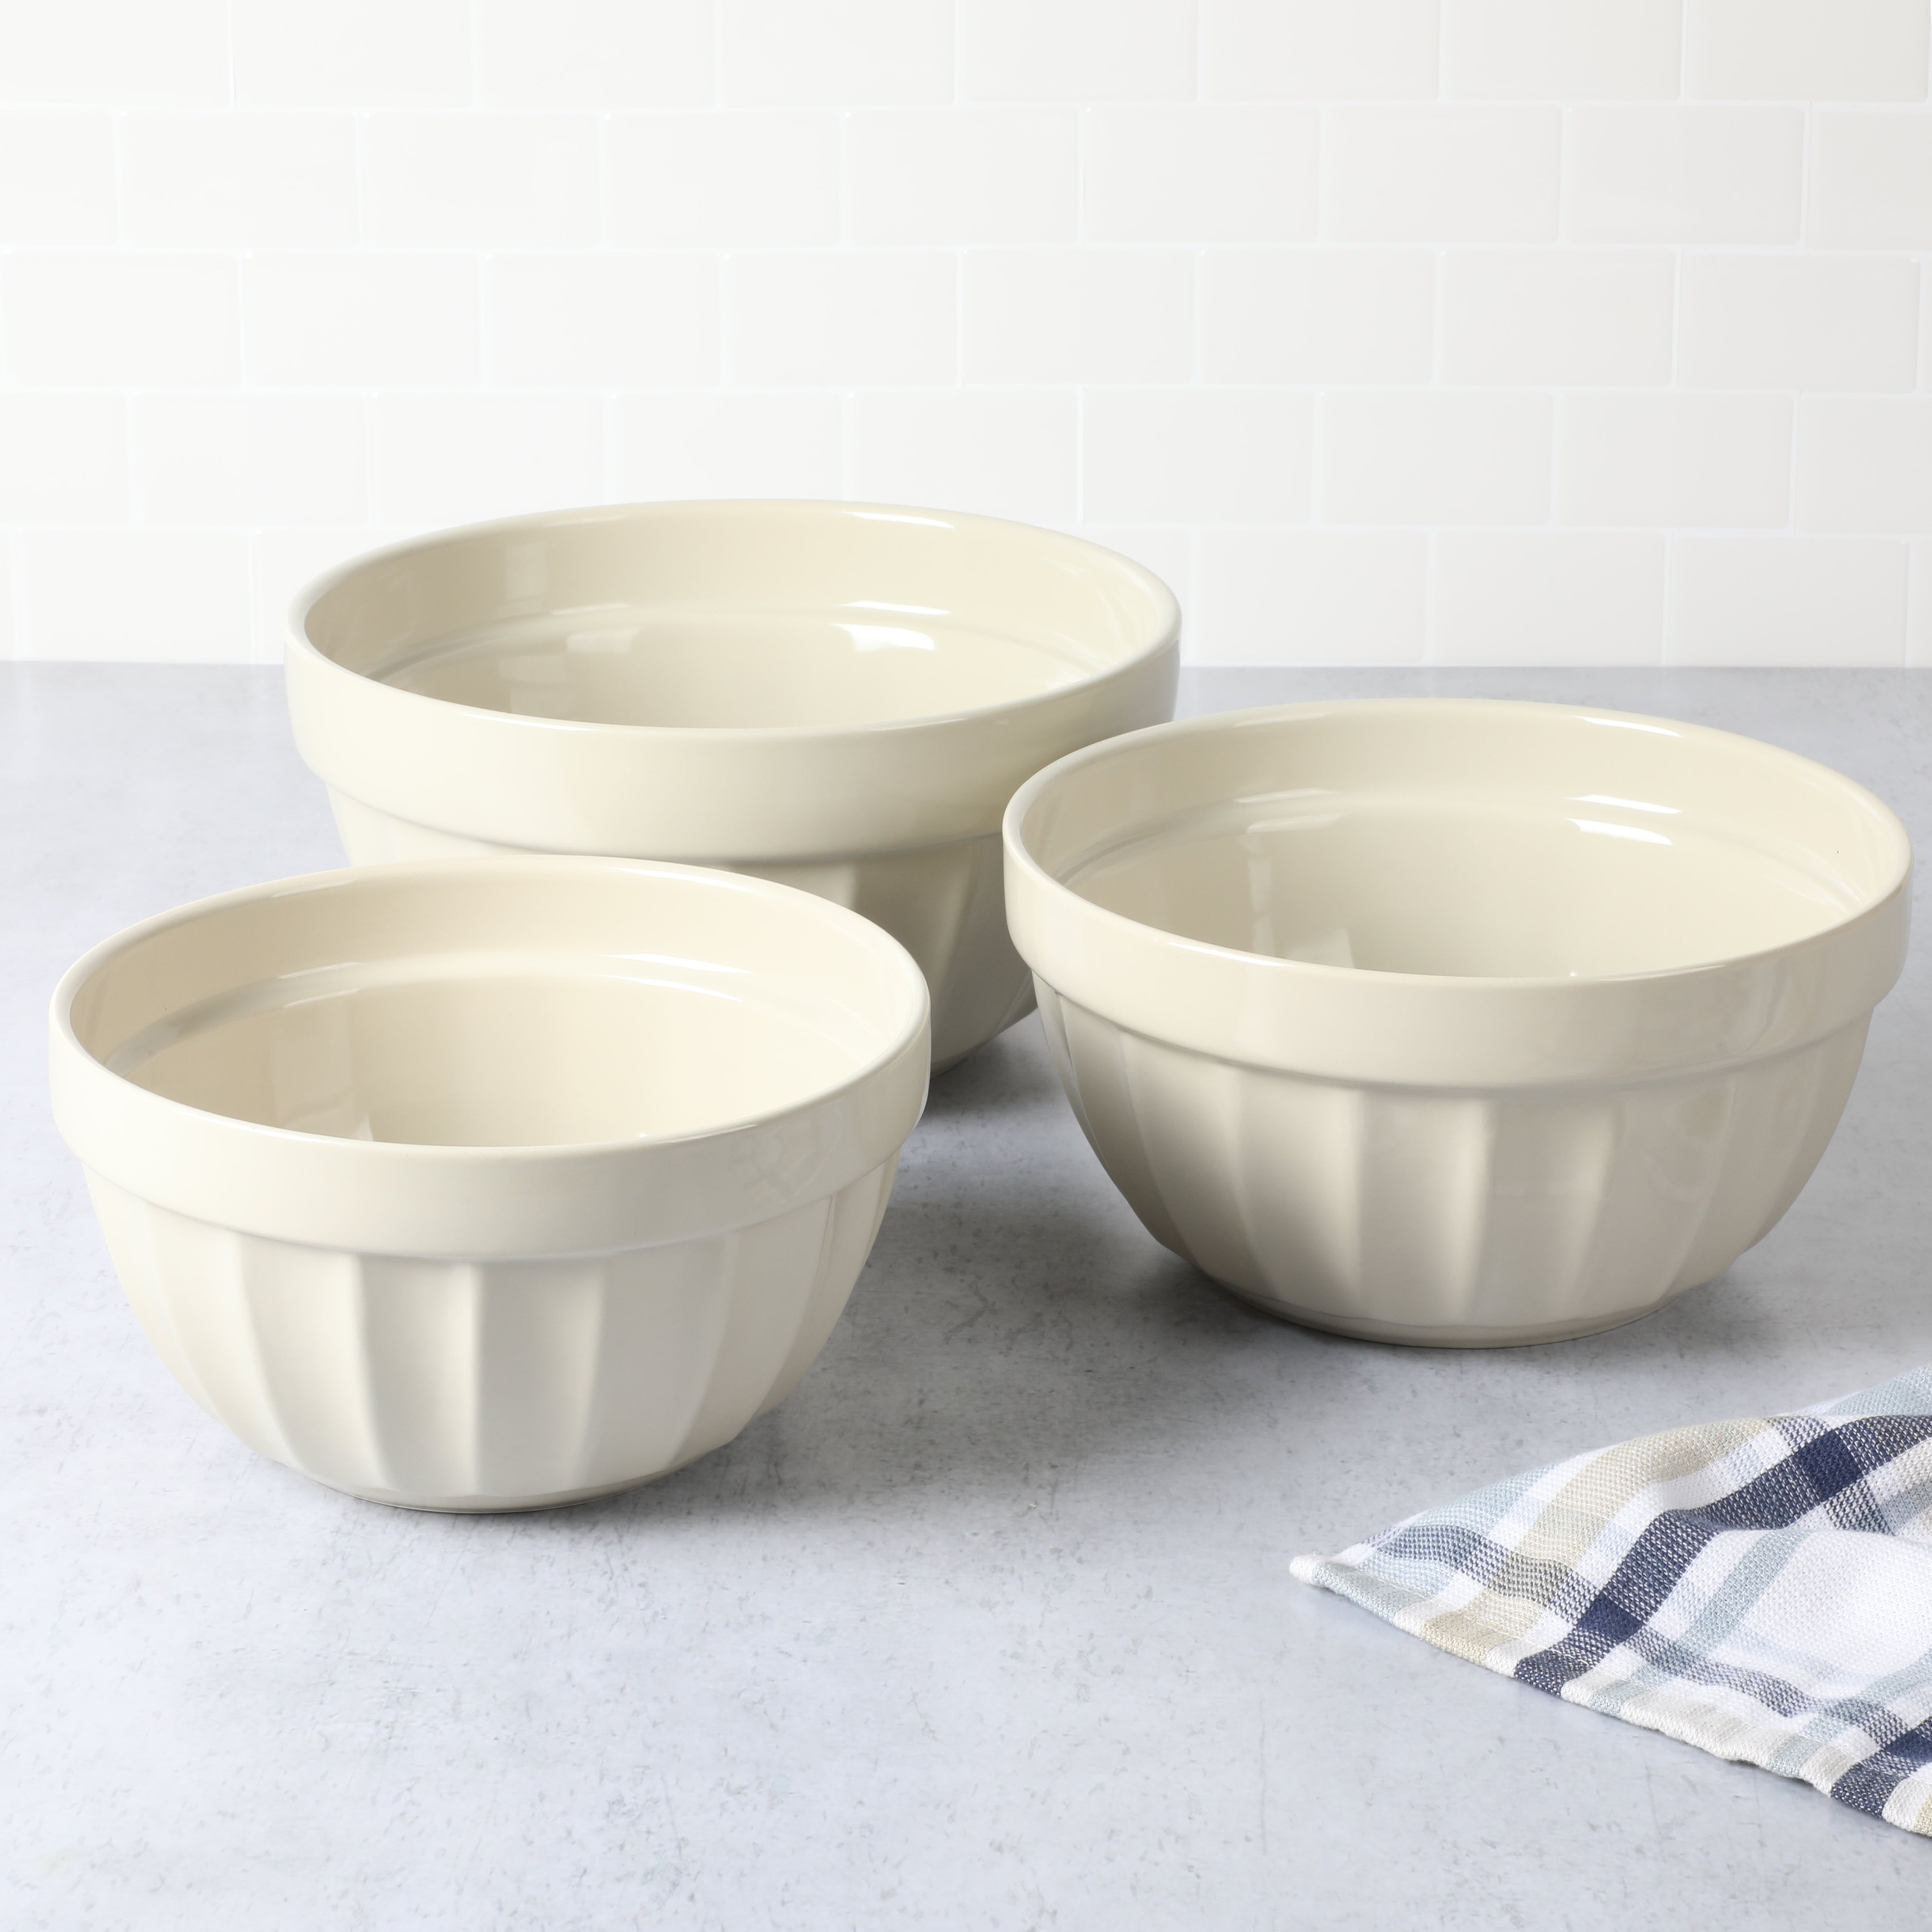 MARTHA STEWART Rhinewell Mirror Polish 6 Piece Stainless Steel Mixing Bowls  with Lid and Non-Slip Base - Grey